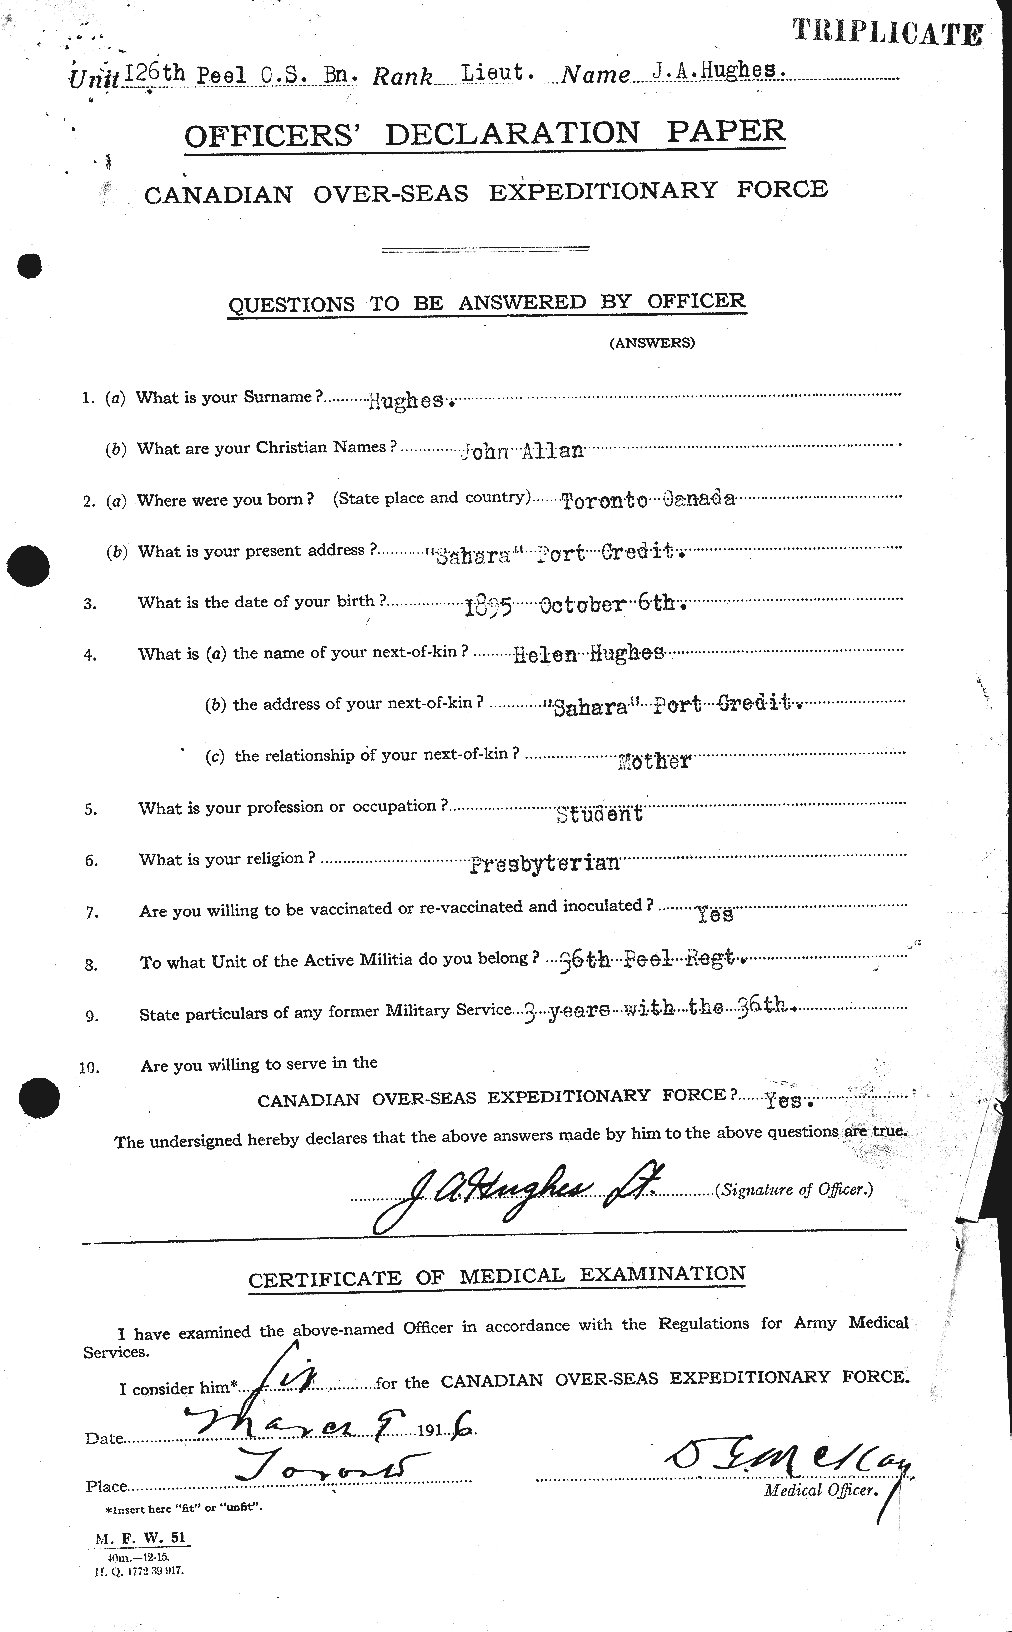 Personnel Records of the First World War - CEF 404006a